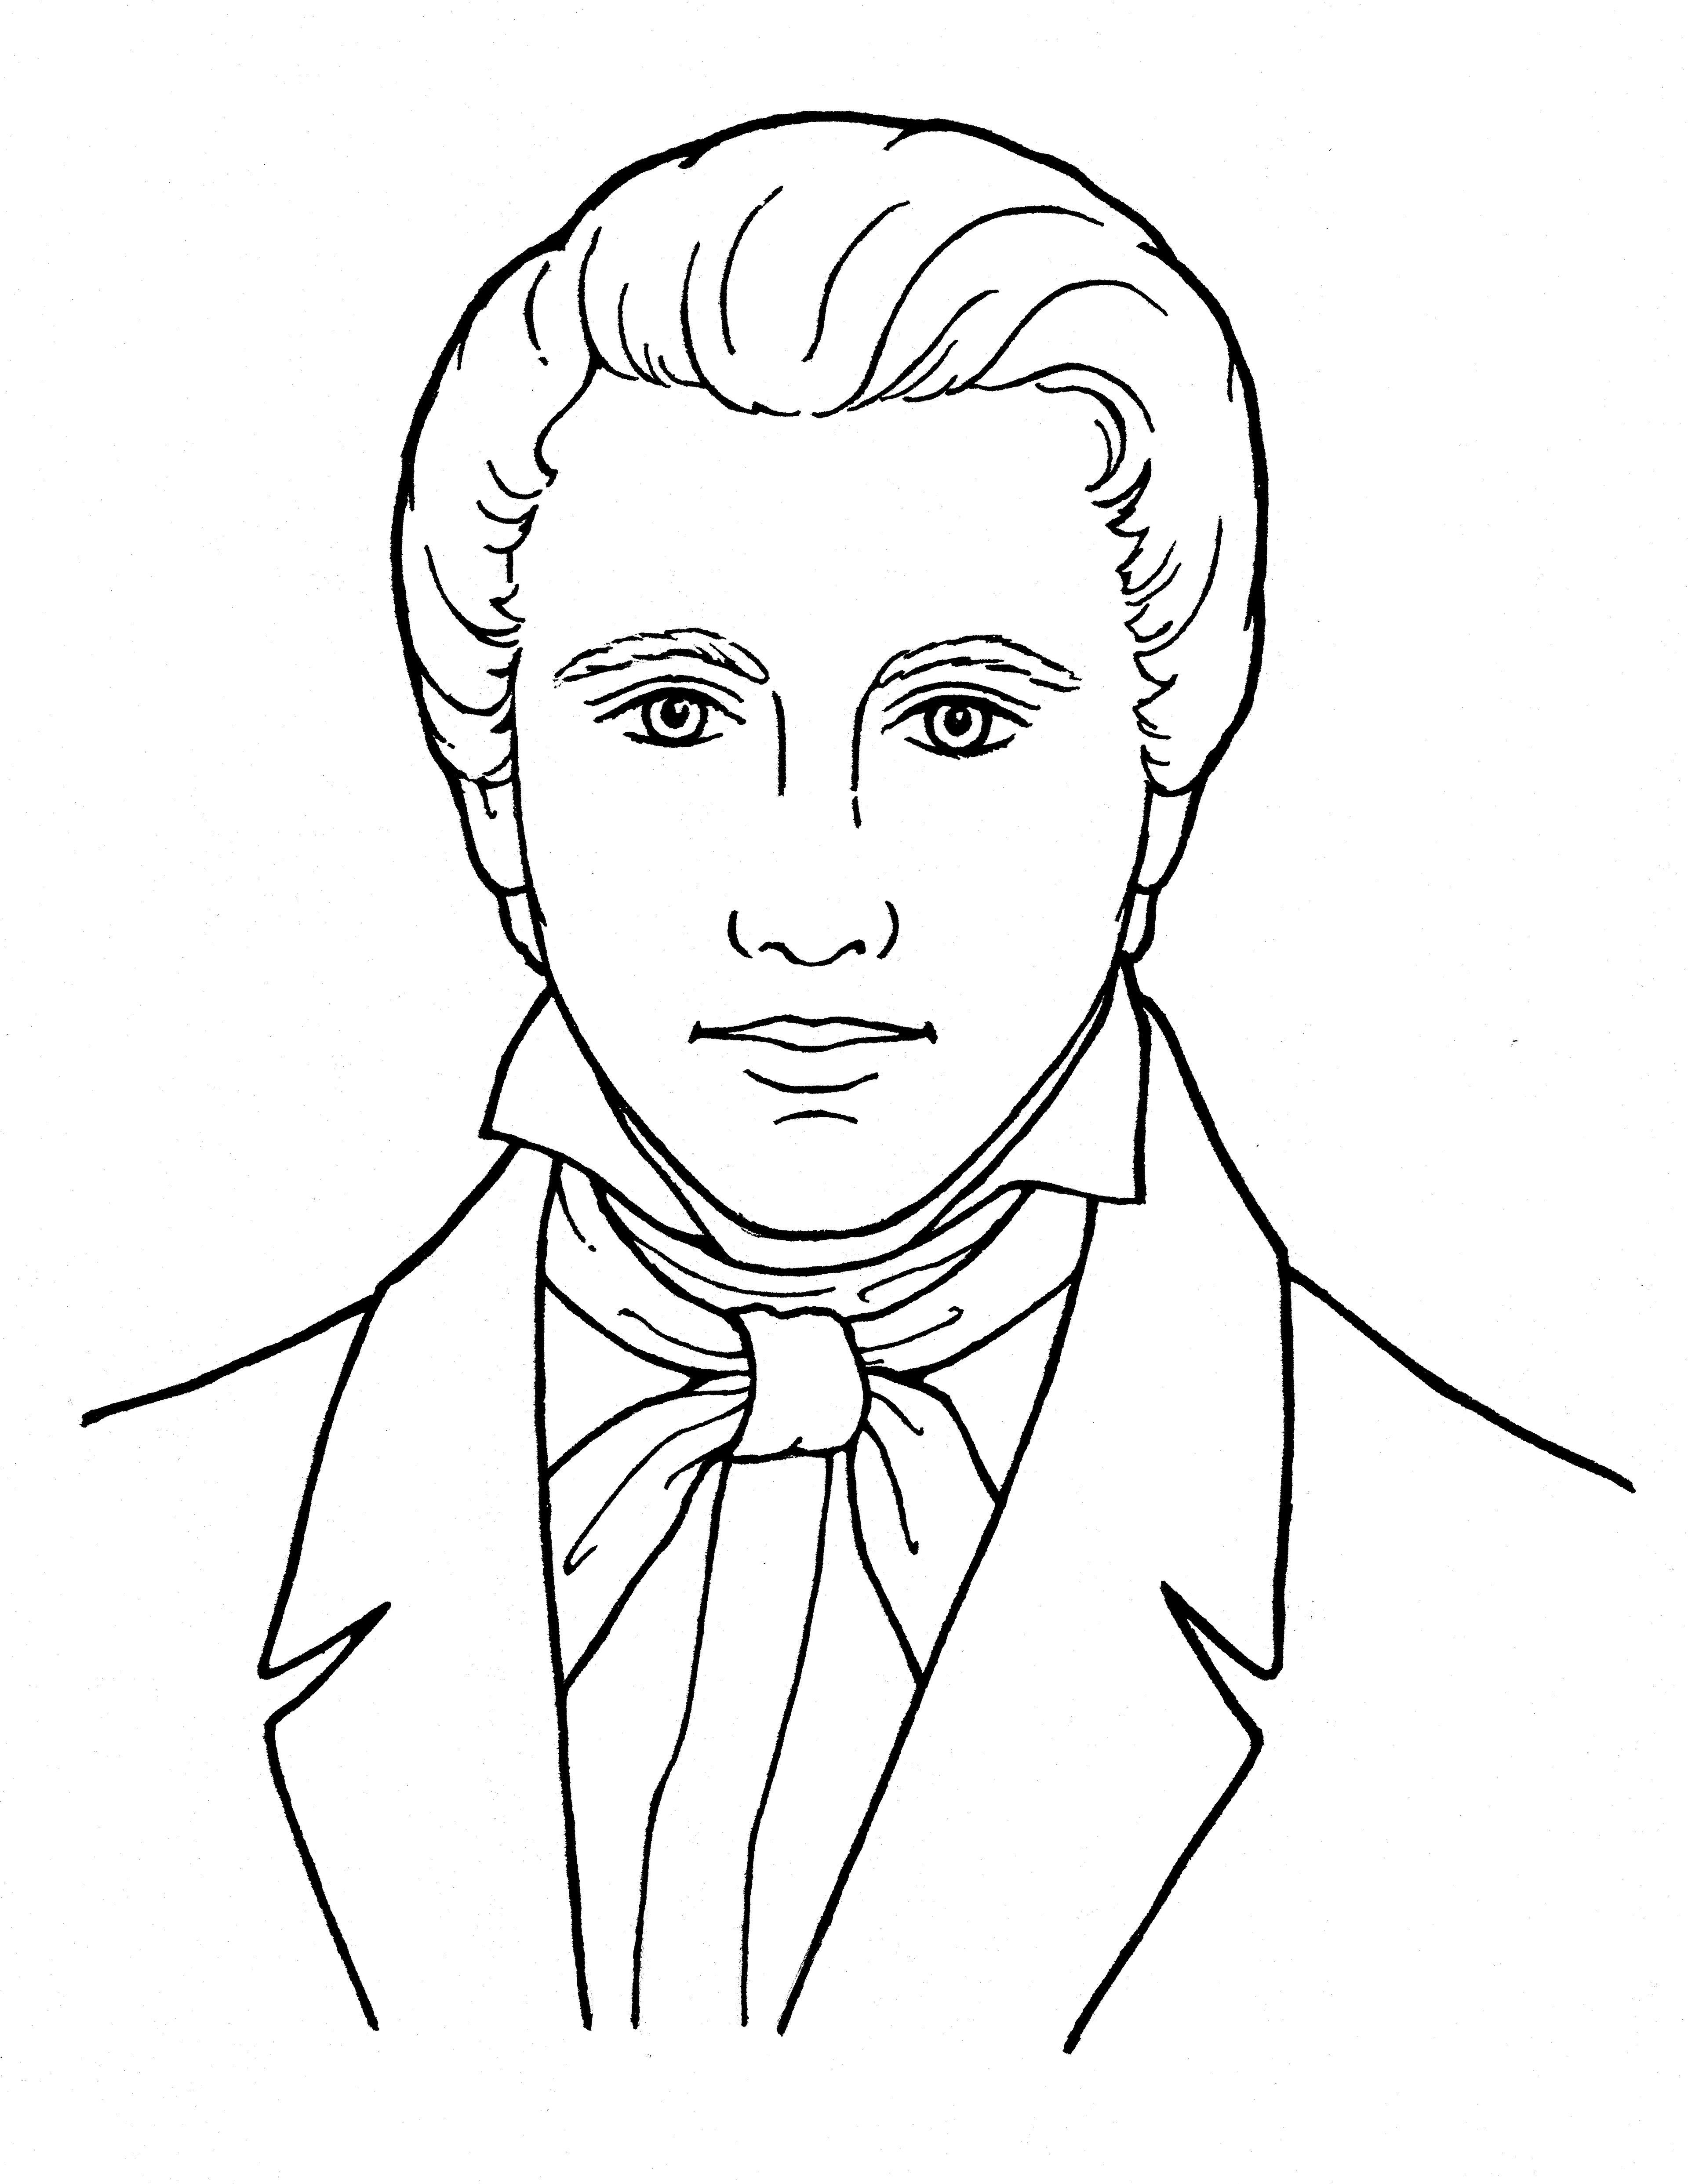 An illustration of Joseph Smith the Prophet, from the nursery manual Behold Your Little Ones (2008), page 107.